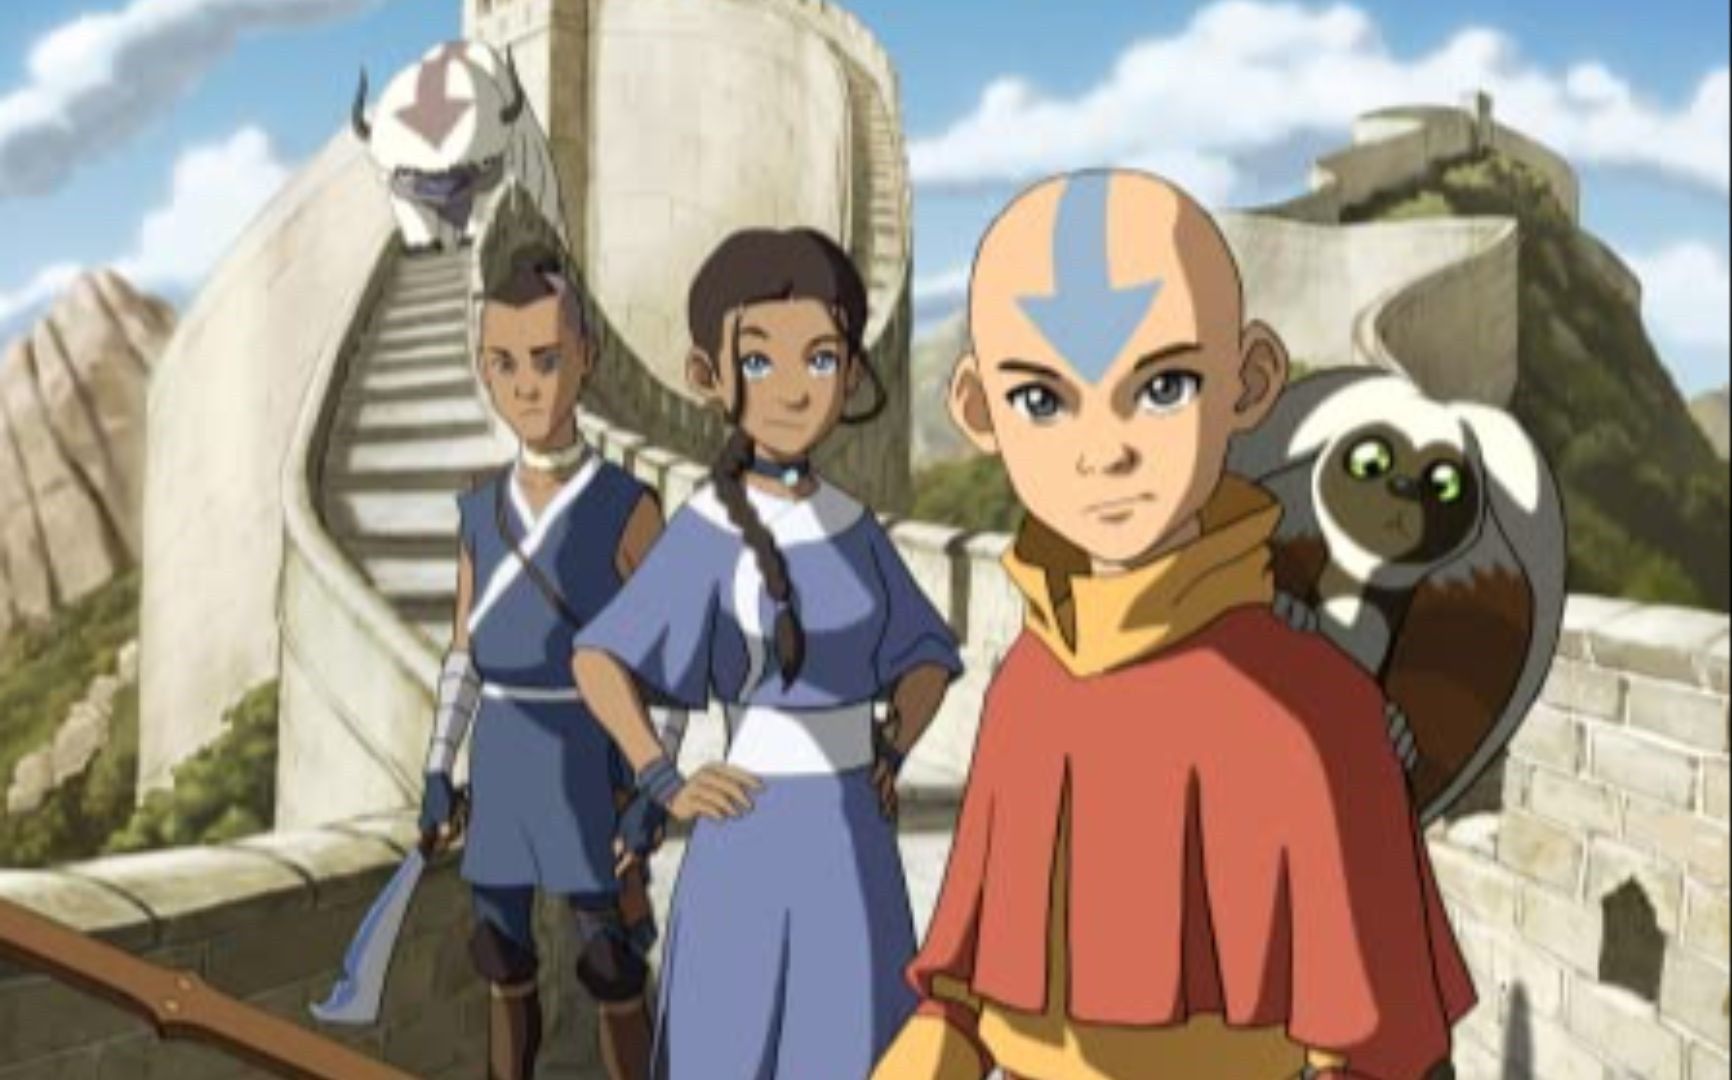 First 'Avatar: The Last Airbender' animated film will be about Aang and friends